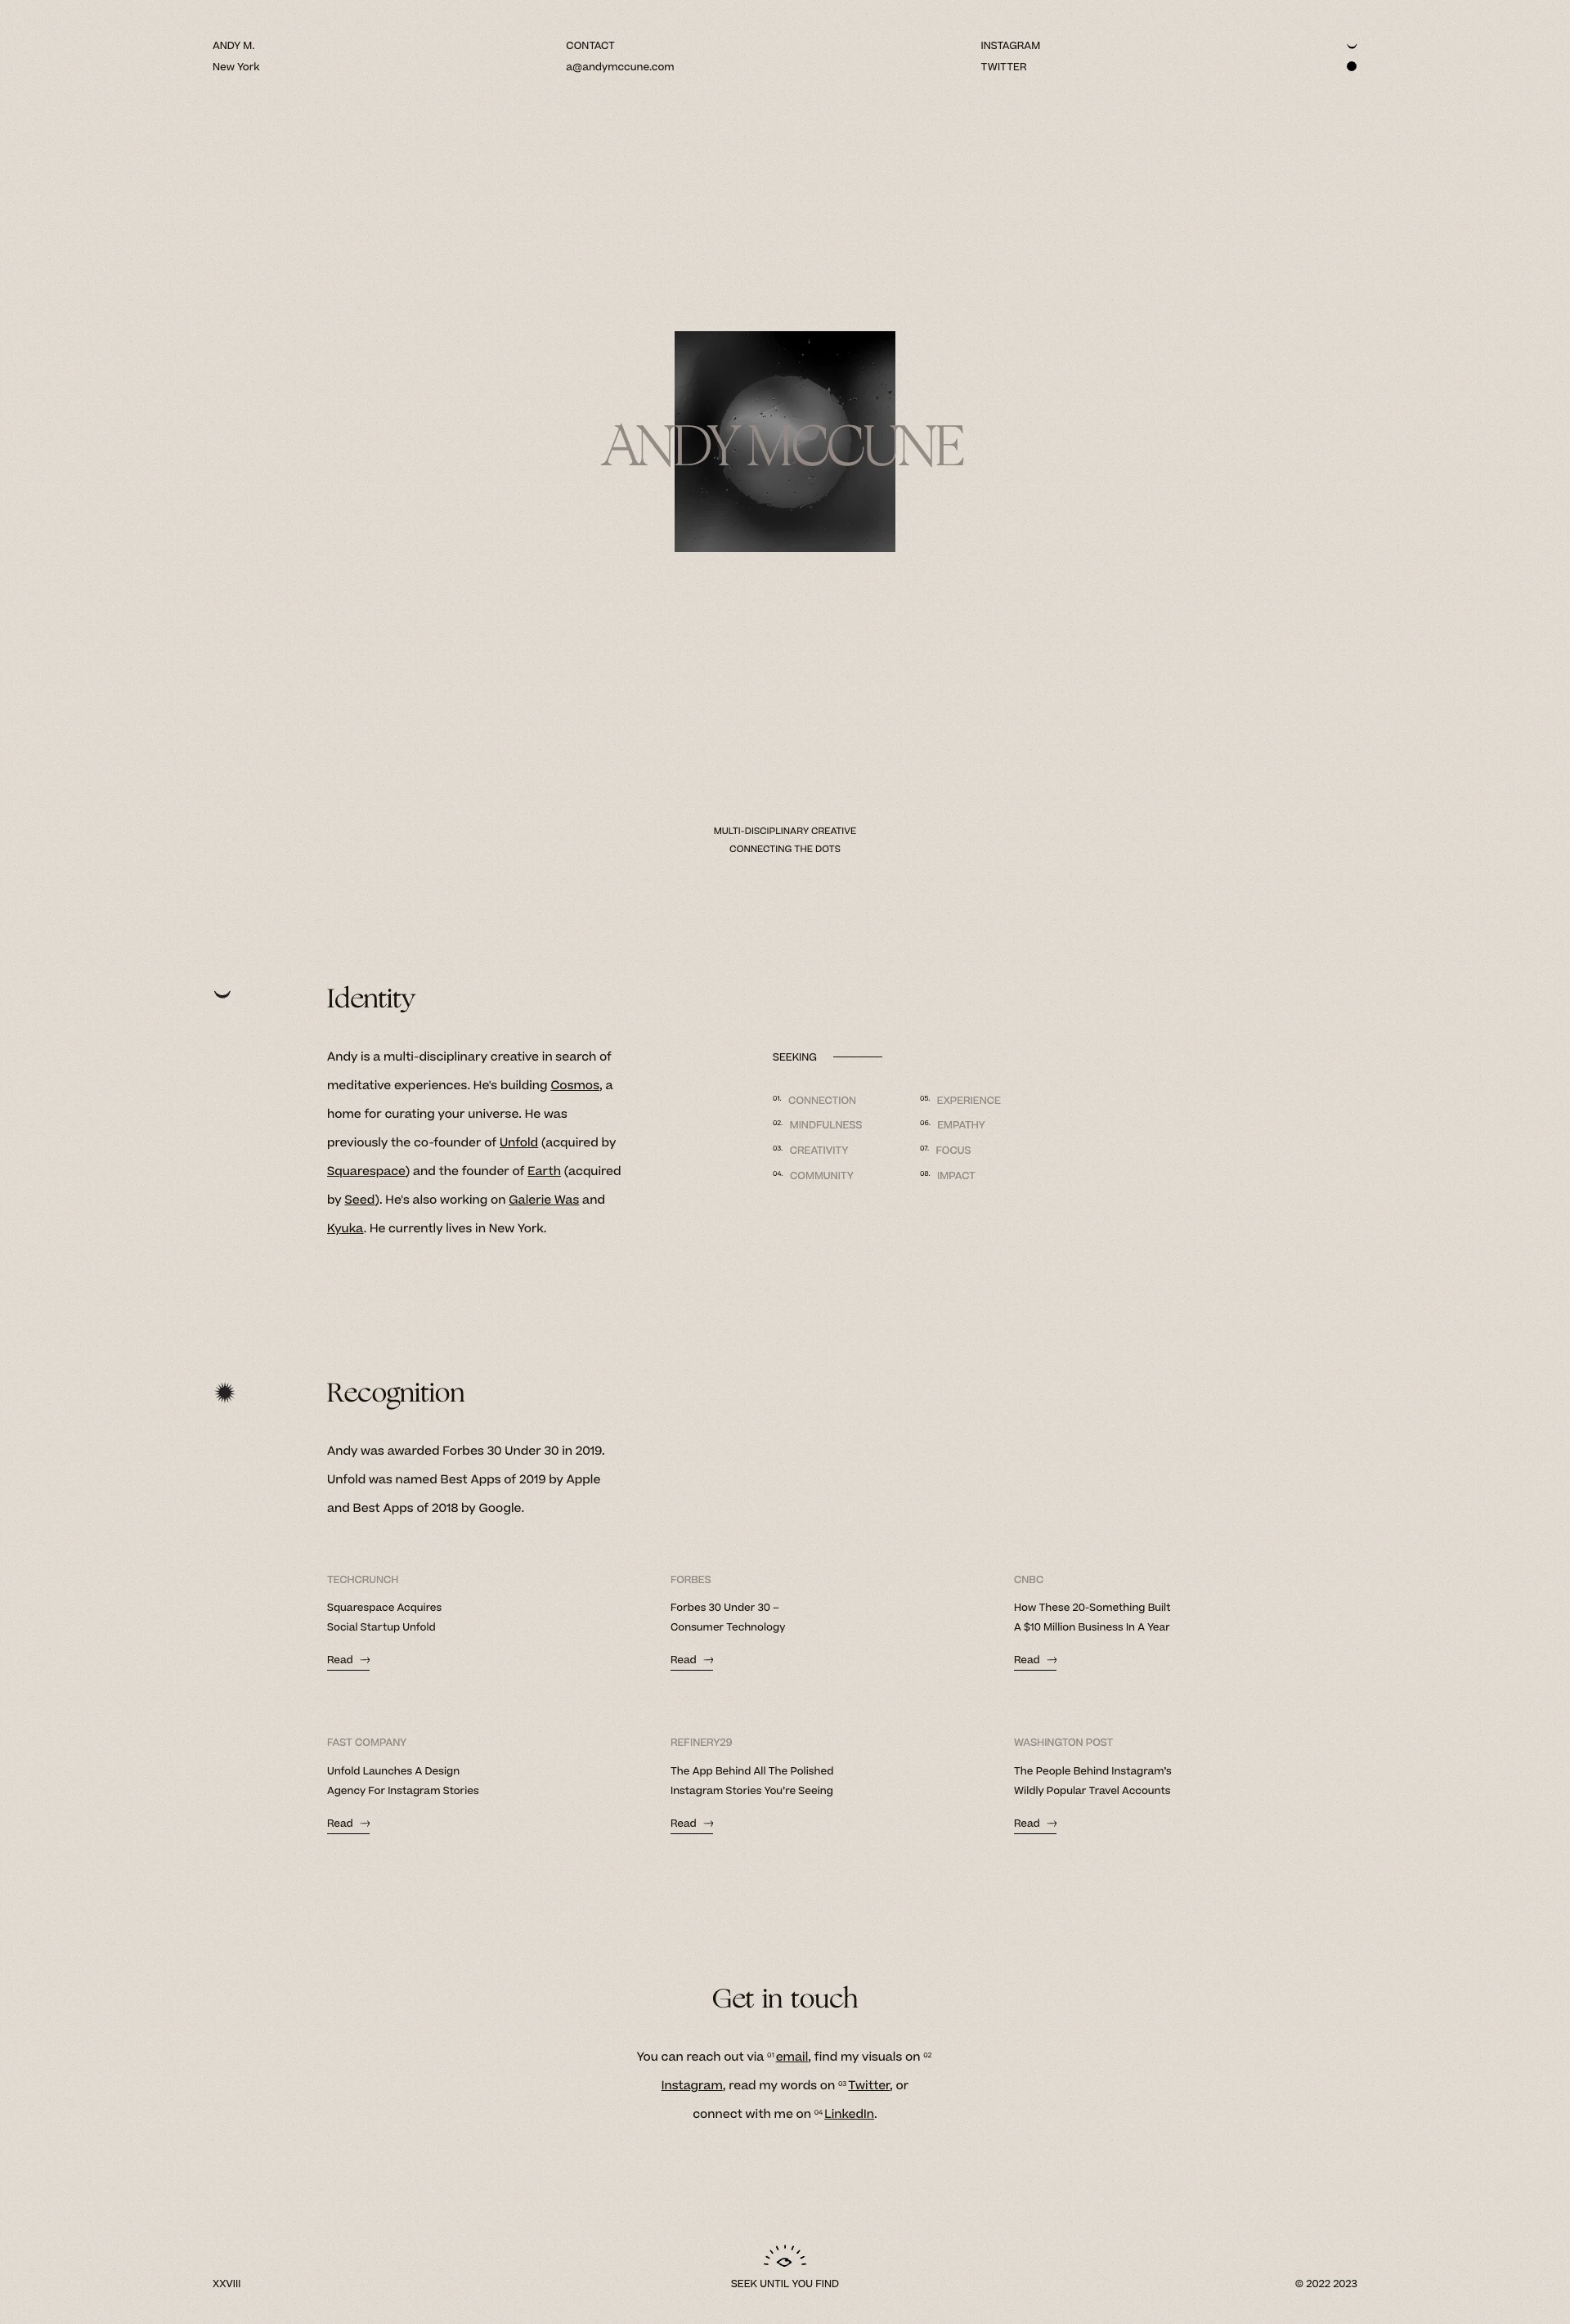 Andy McCune Landing Page Example: Andy is a multi-disciplinary entrepreneur and creative. He's the co-founder of Unfold (acquired by Squarespace), as well as the founder of Earth. He currently lives in New York City.